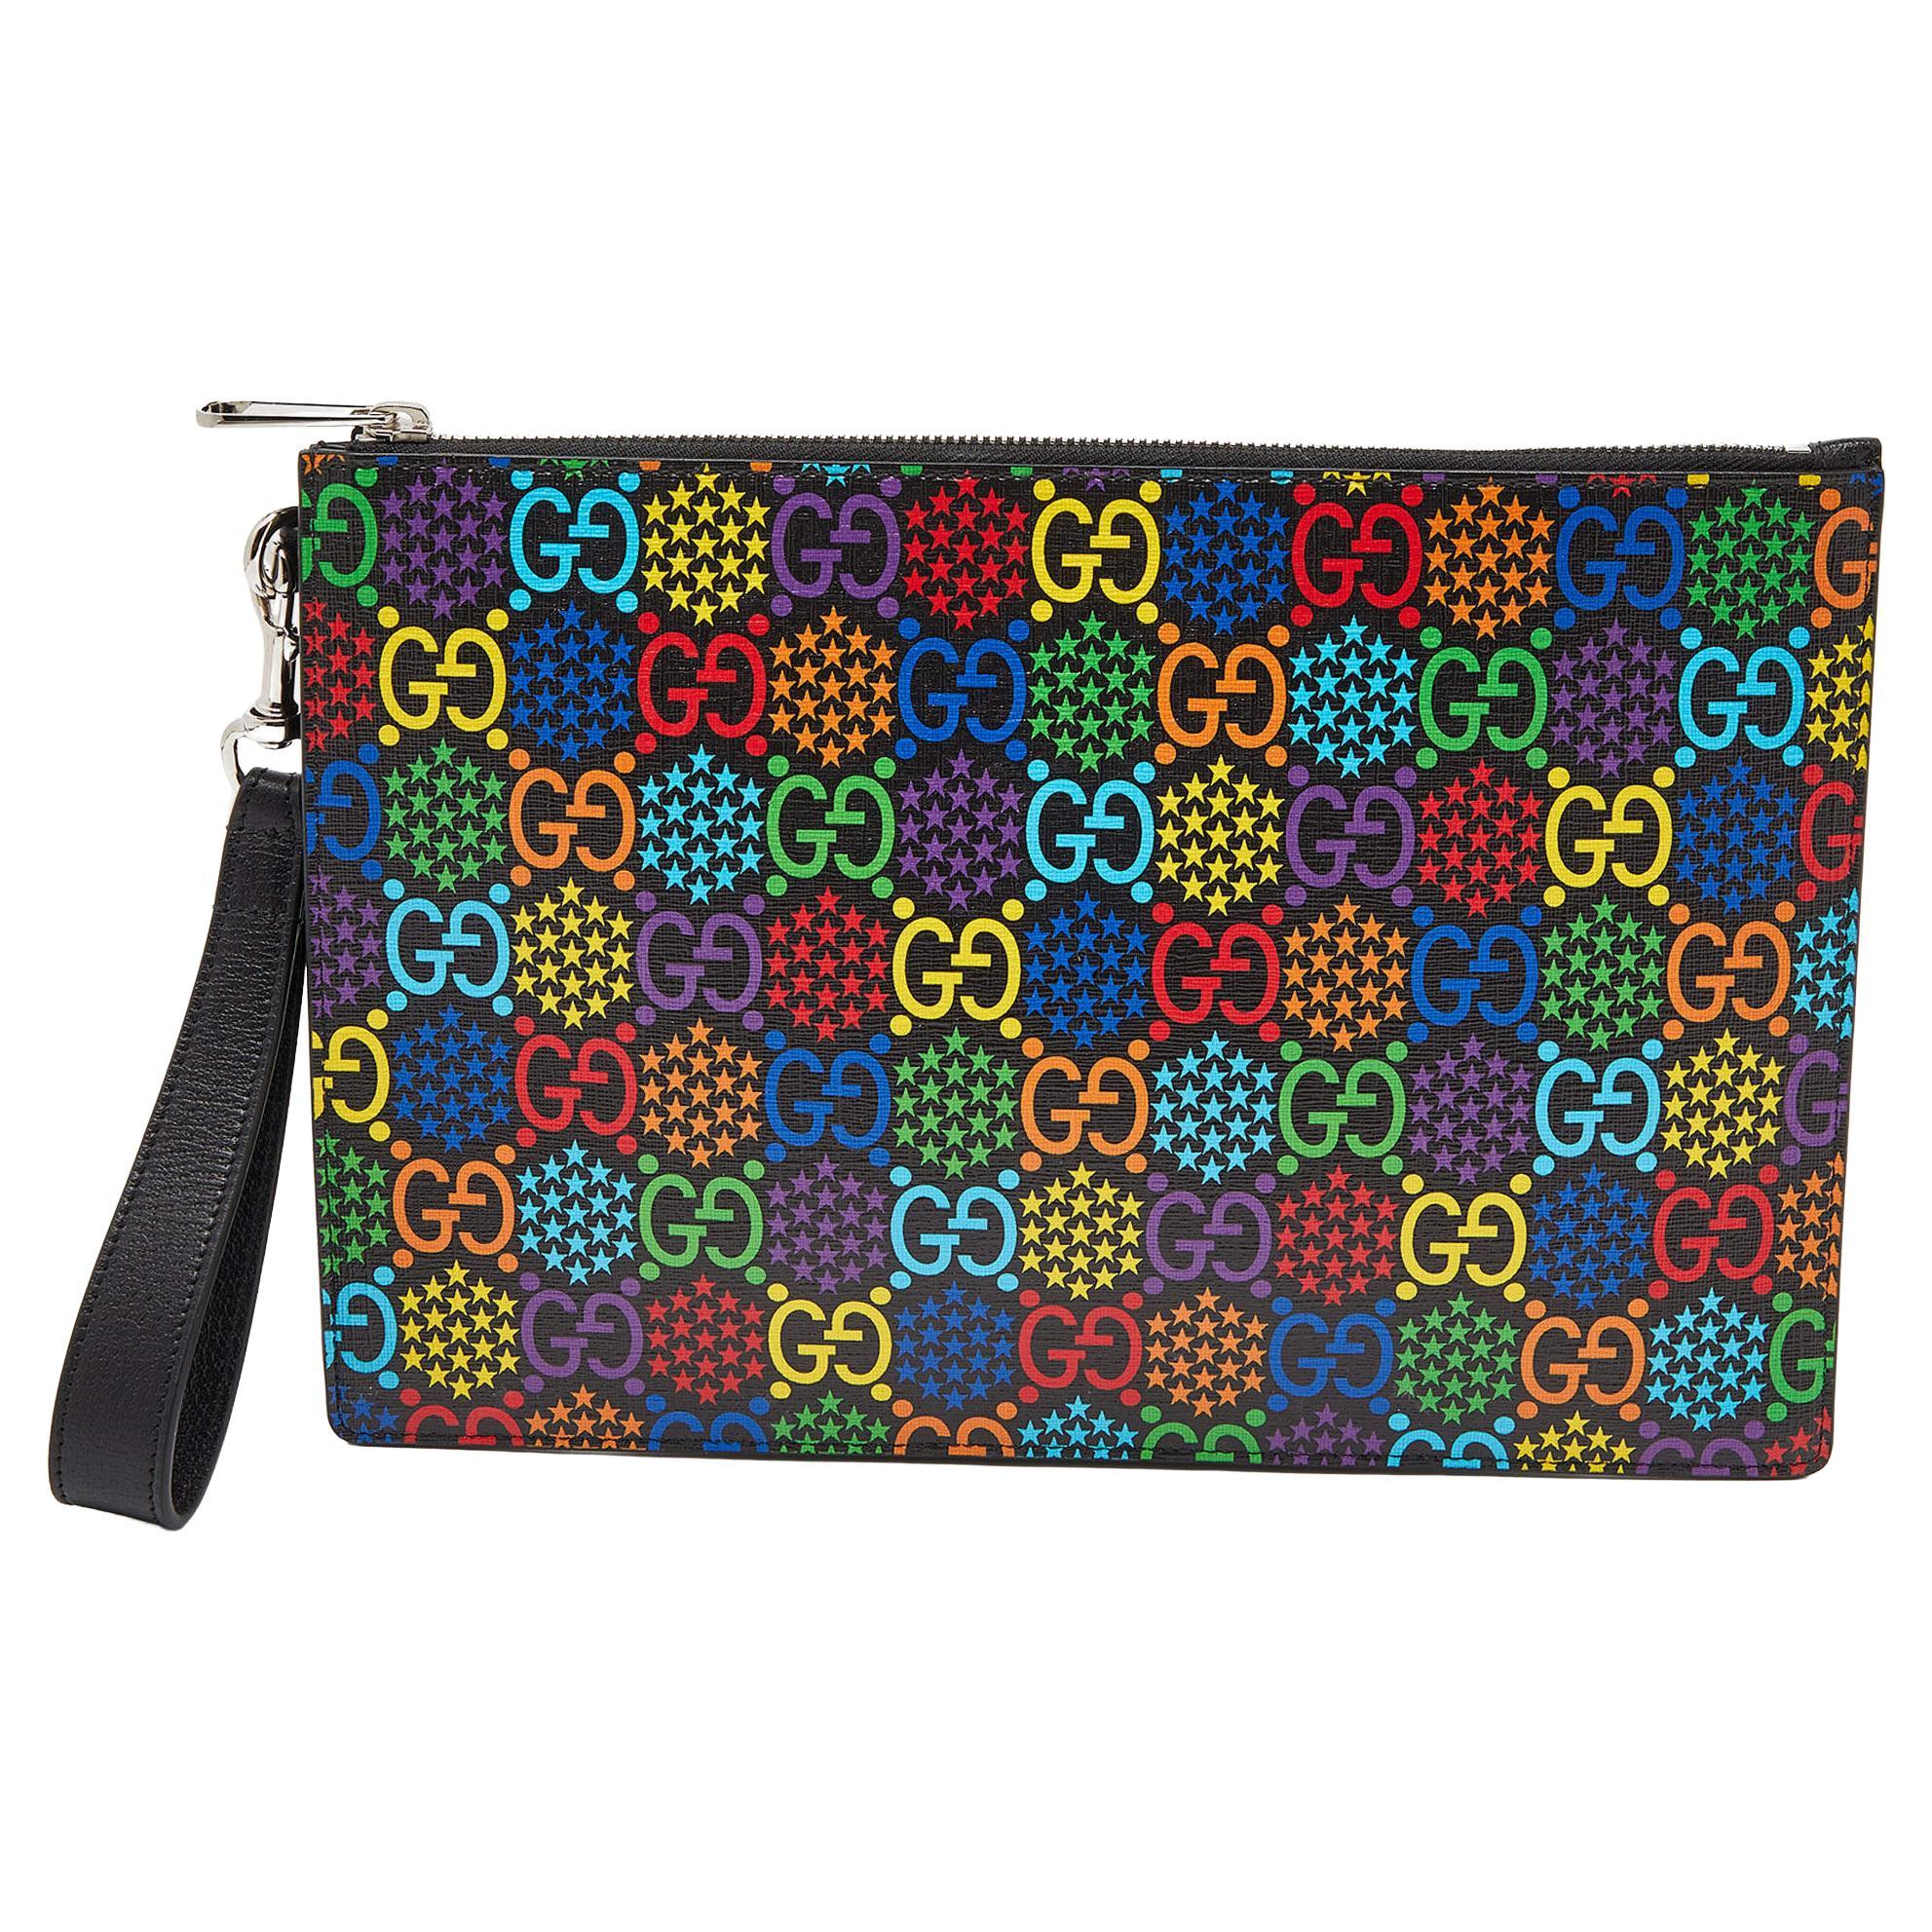 Gucci Multicolor GG Supreme Canvas and Leather Psychedelic Wristlet Clutch